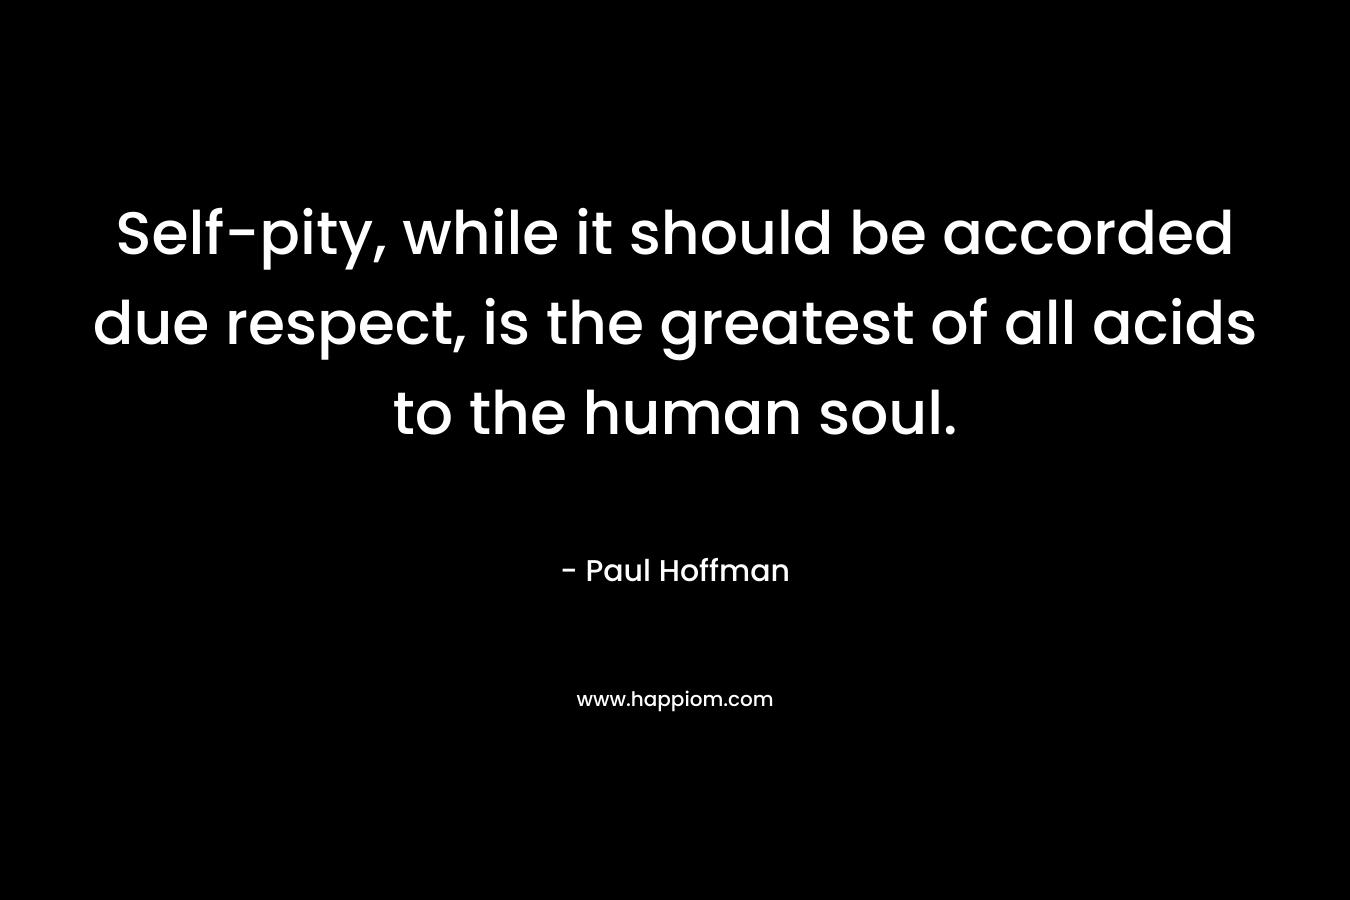 Self-pity, while it should be accorded due respect, is the greatest of all acids to the human soul. – Paul Hoffman